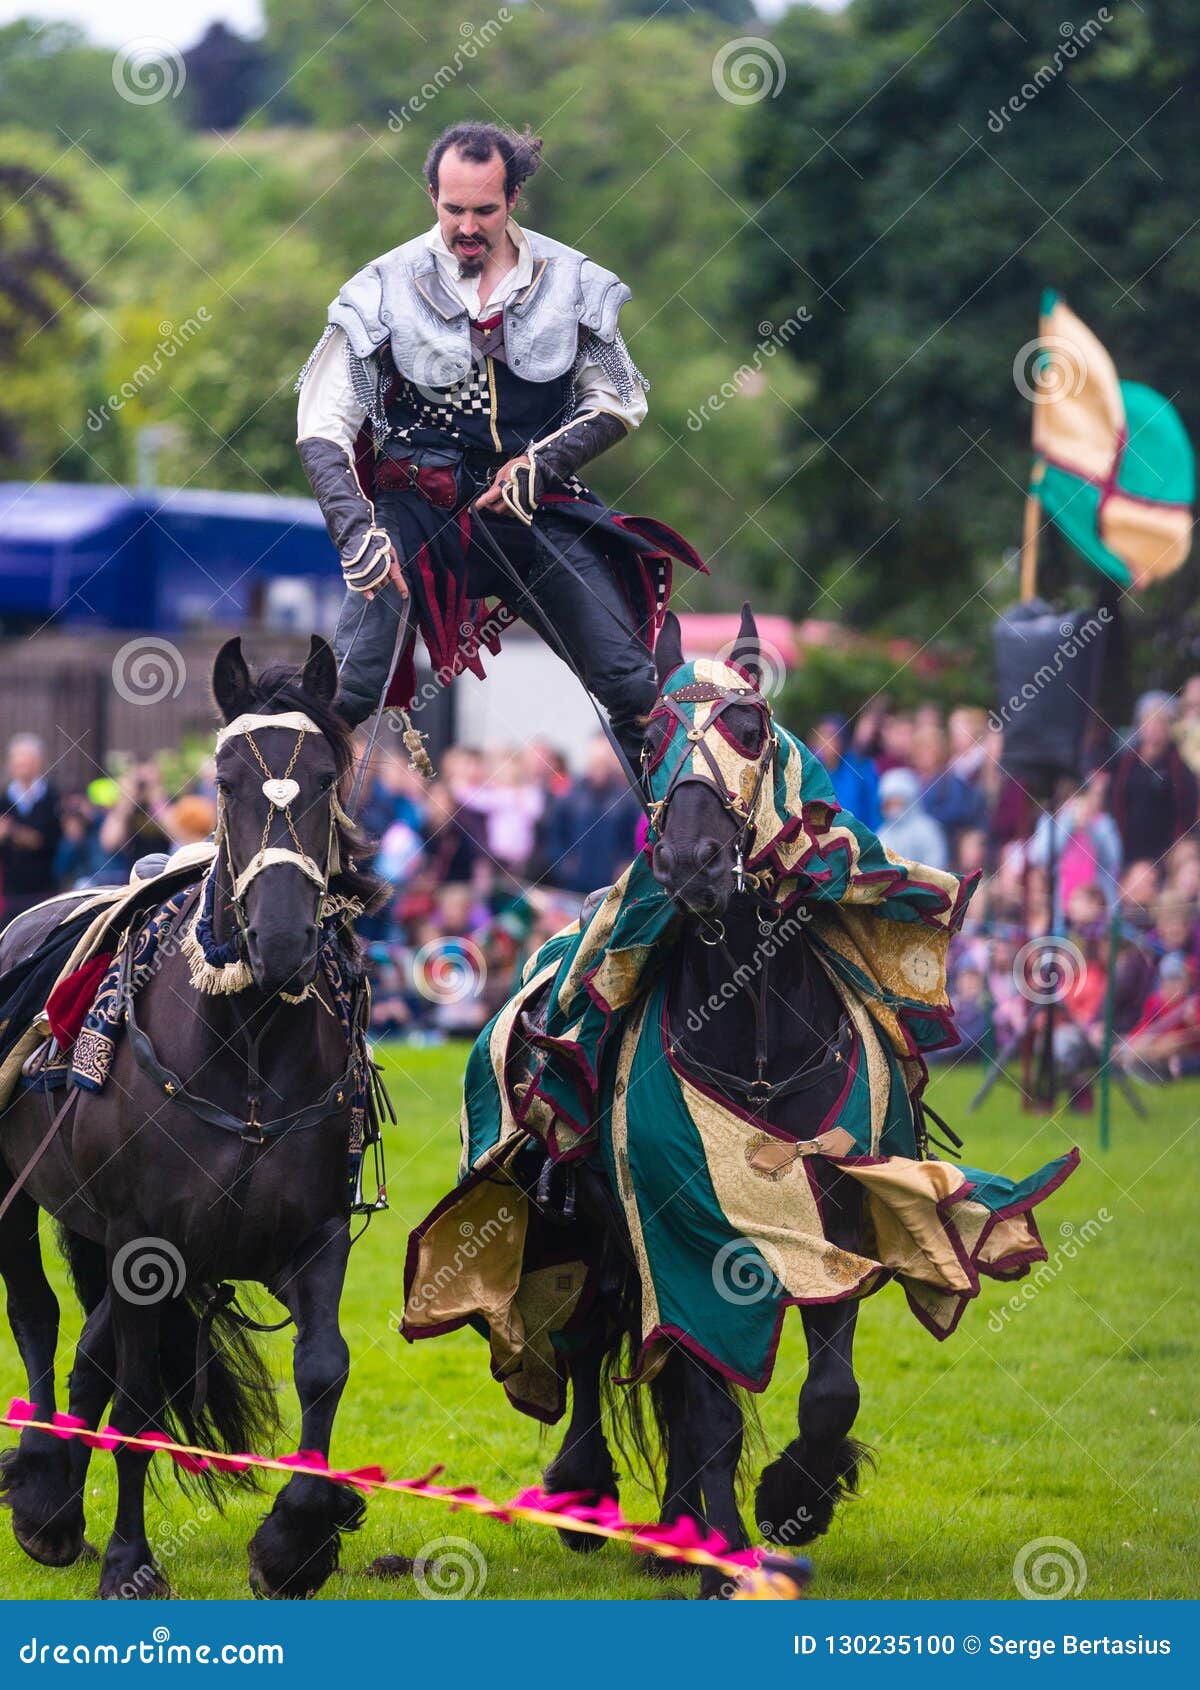 Annual Medieval Jousting Tournament at Linlithgow Palace, Scotland